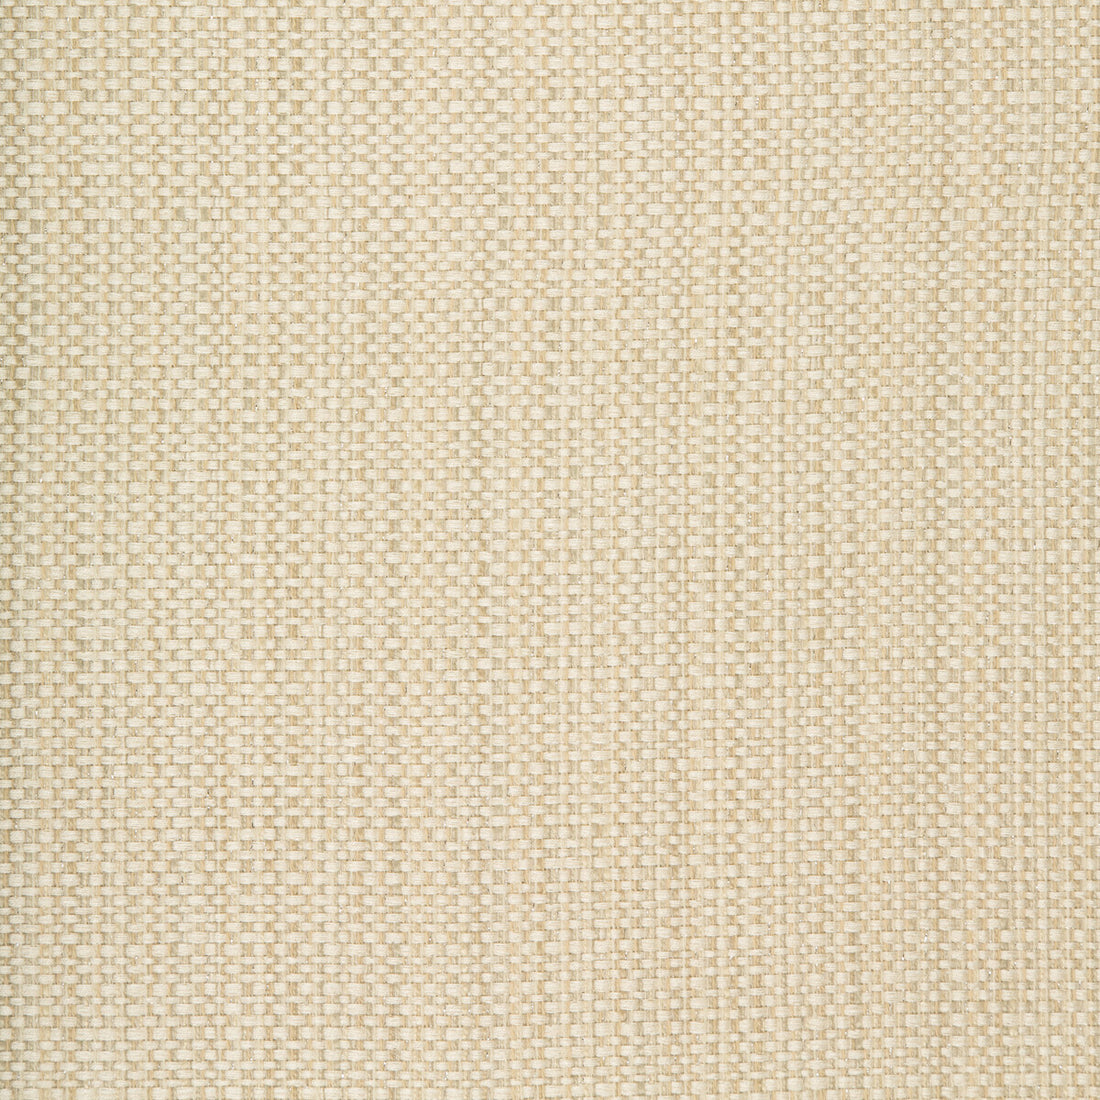 Kravet Contract fabric in 34746-116 color - pattern 34746.116.0 - by Kravet Contract in the Incase Crypton Gis collection